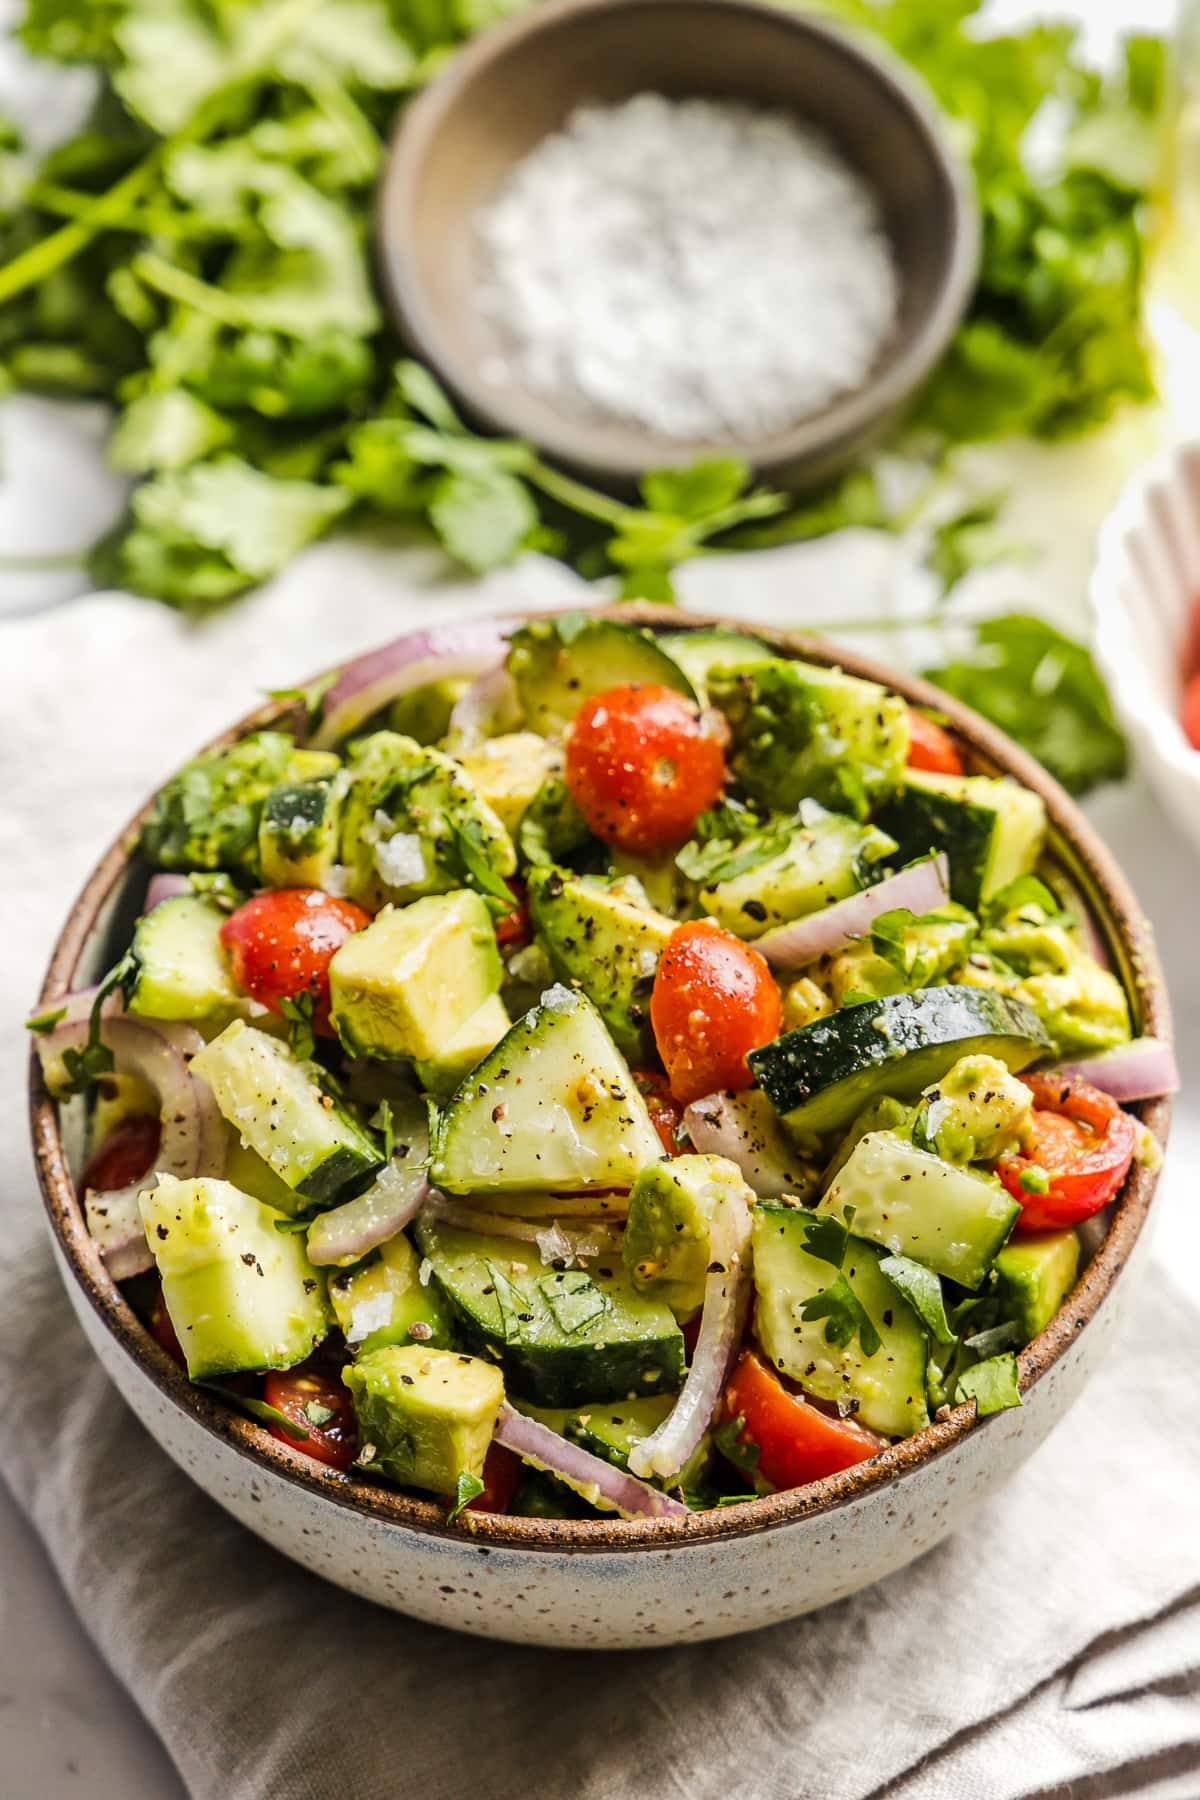 Avocado salad made from cucumbers, avocados, tomatoes, and red onions.